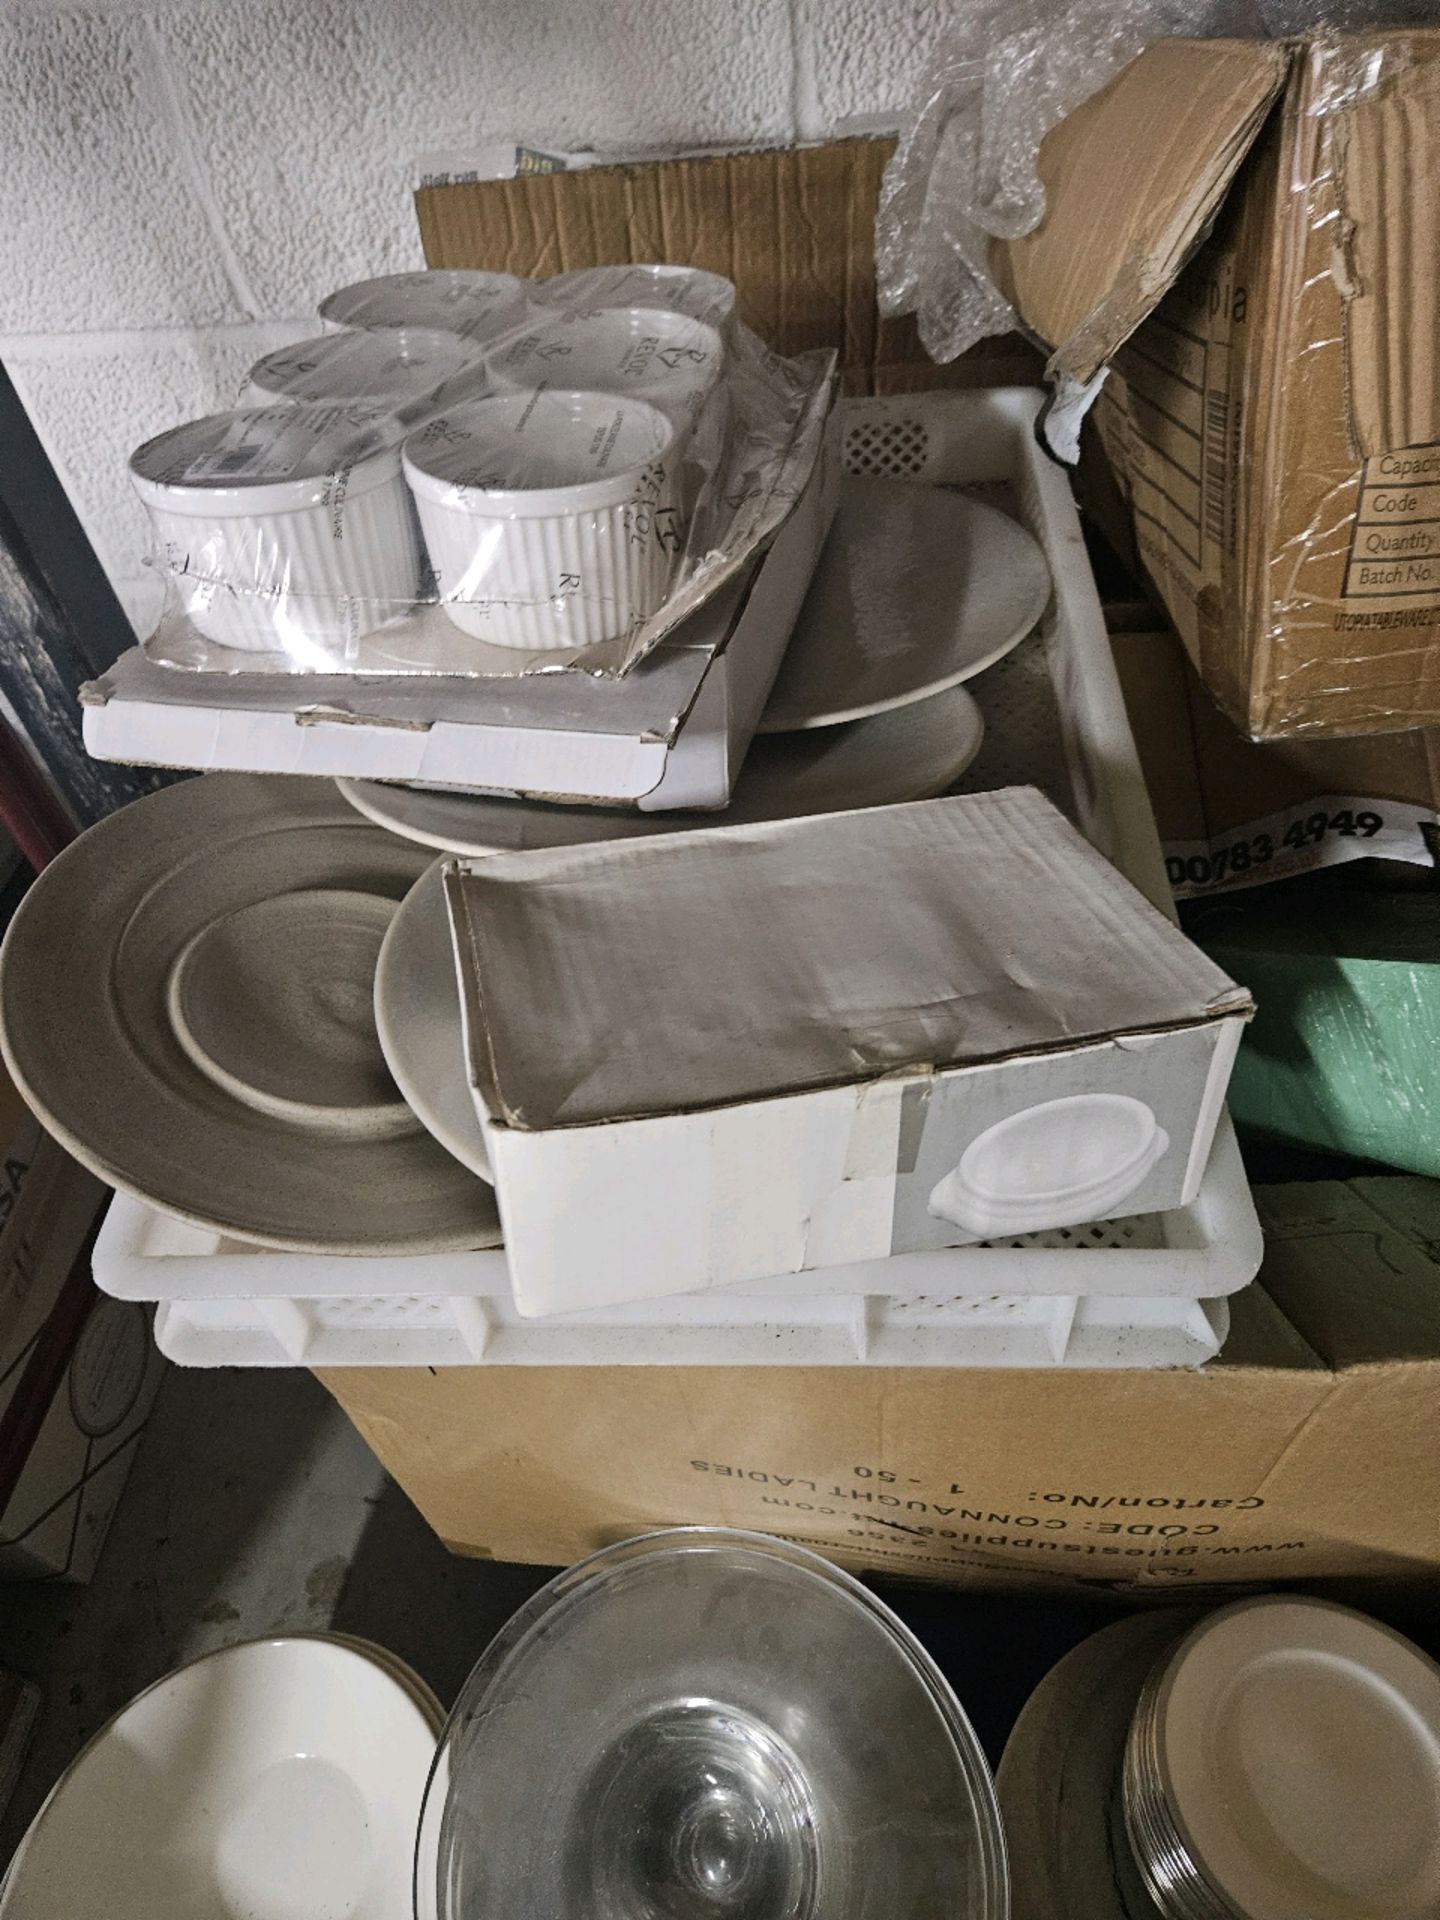 Quantity of Crockery and Kitchen Ware - Image 5 of 7